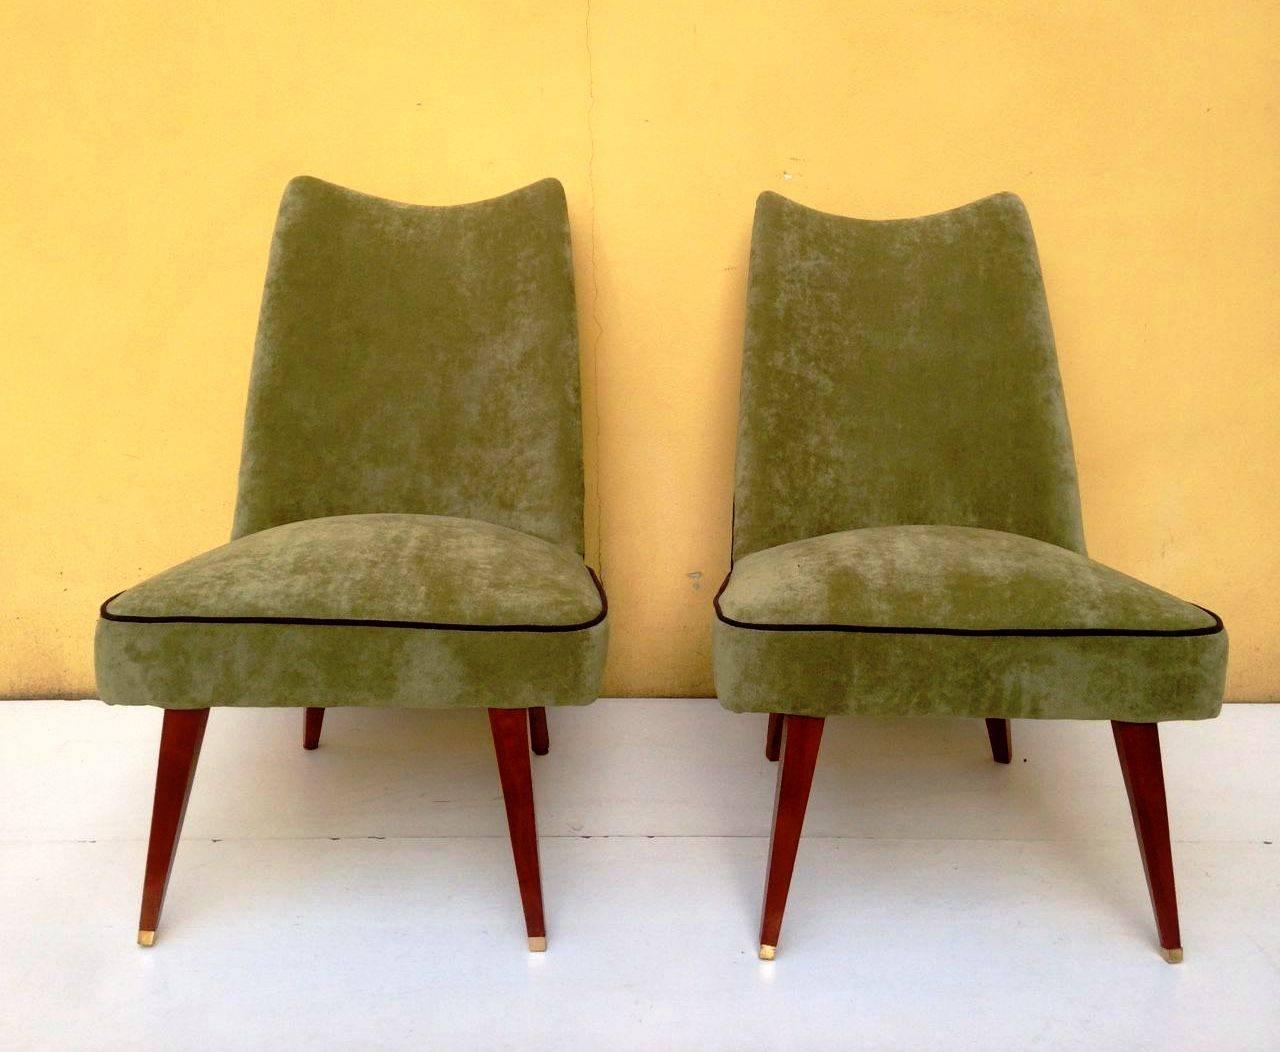 Amazing unique pair of side chairs attributed to Melchiorre Bega.
These chairs have been designed for a Milanese interior in the 1940s and aren't production pieces.